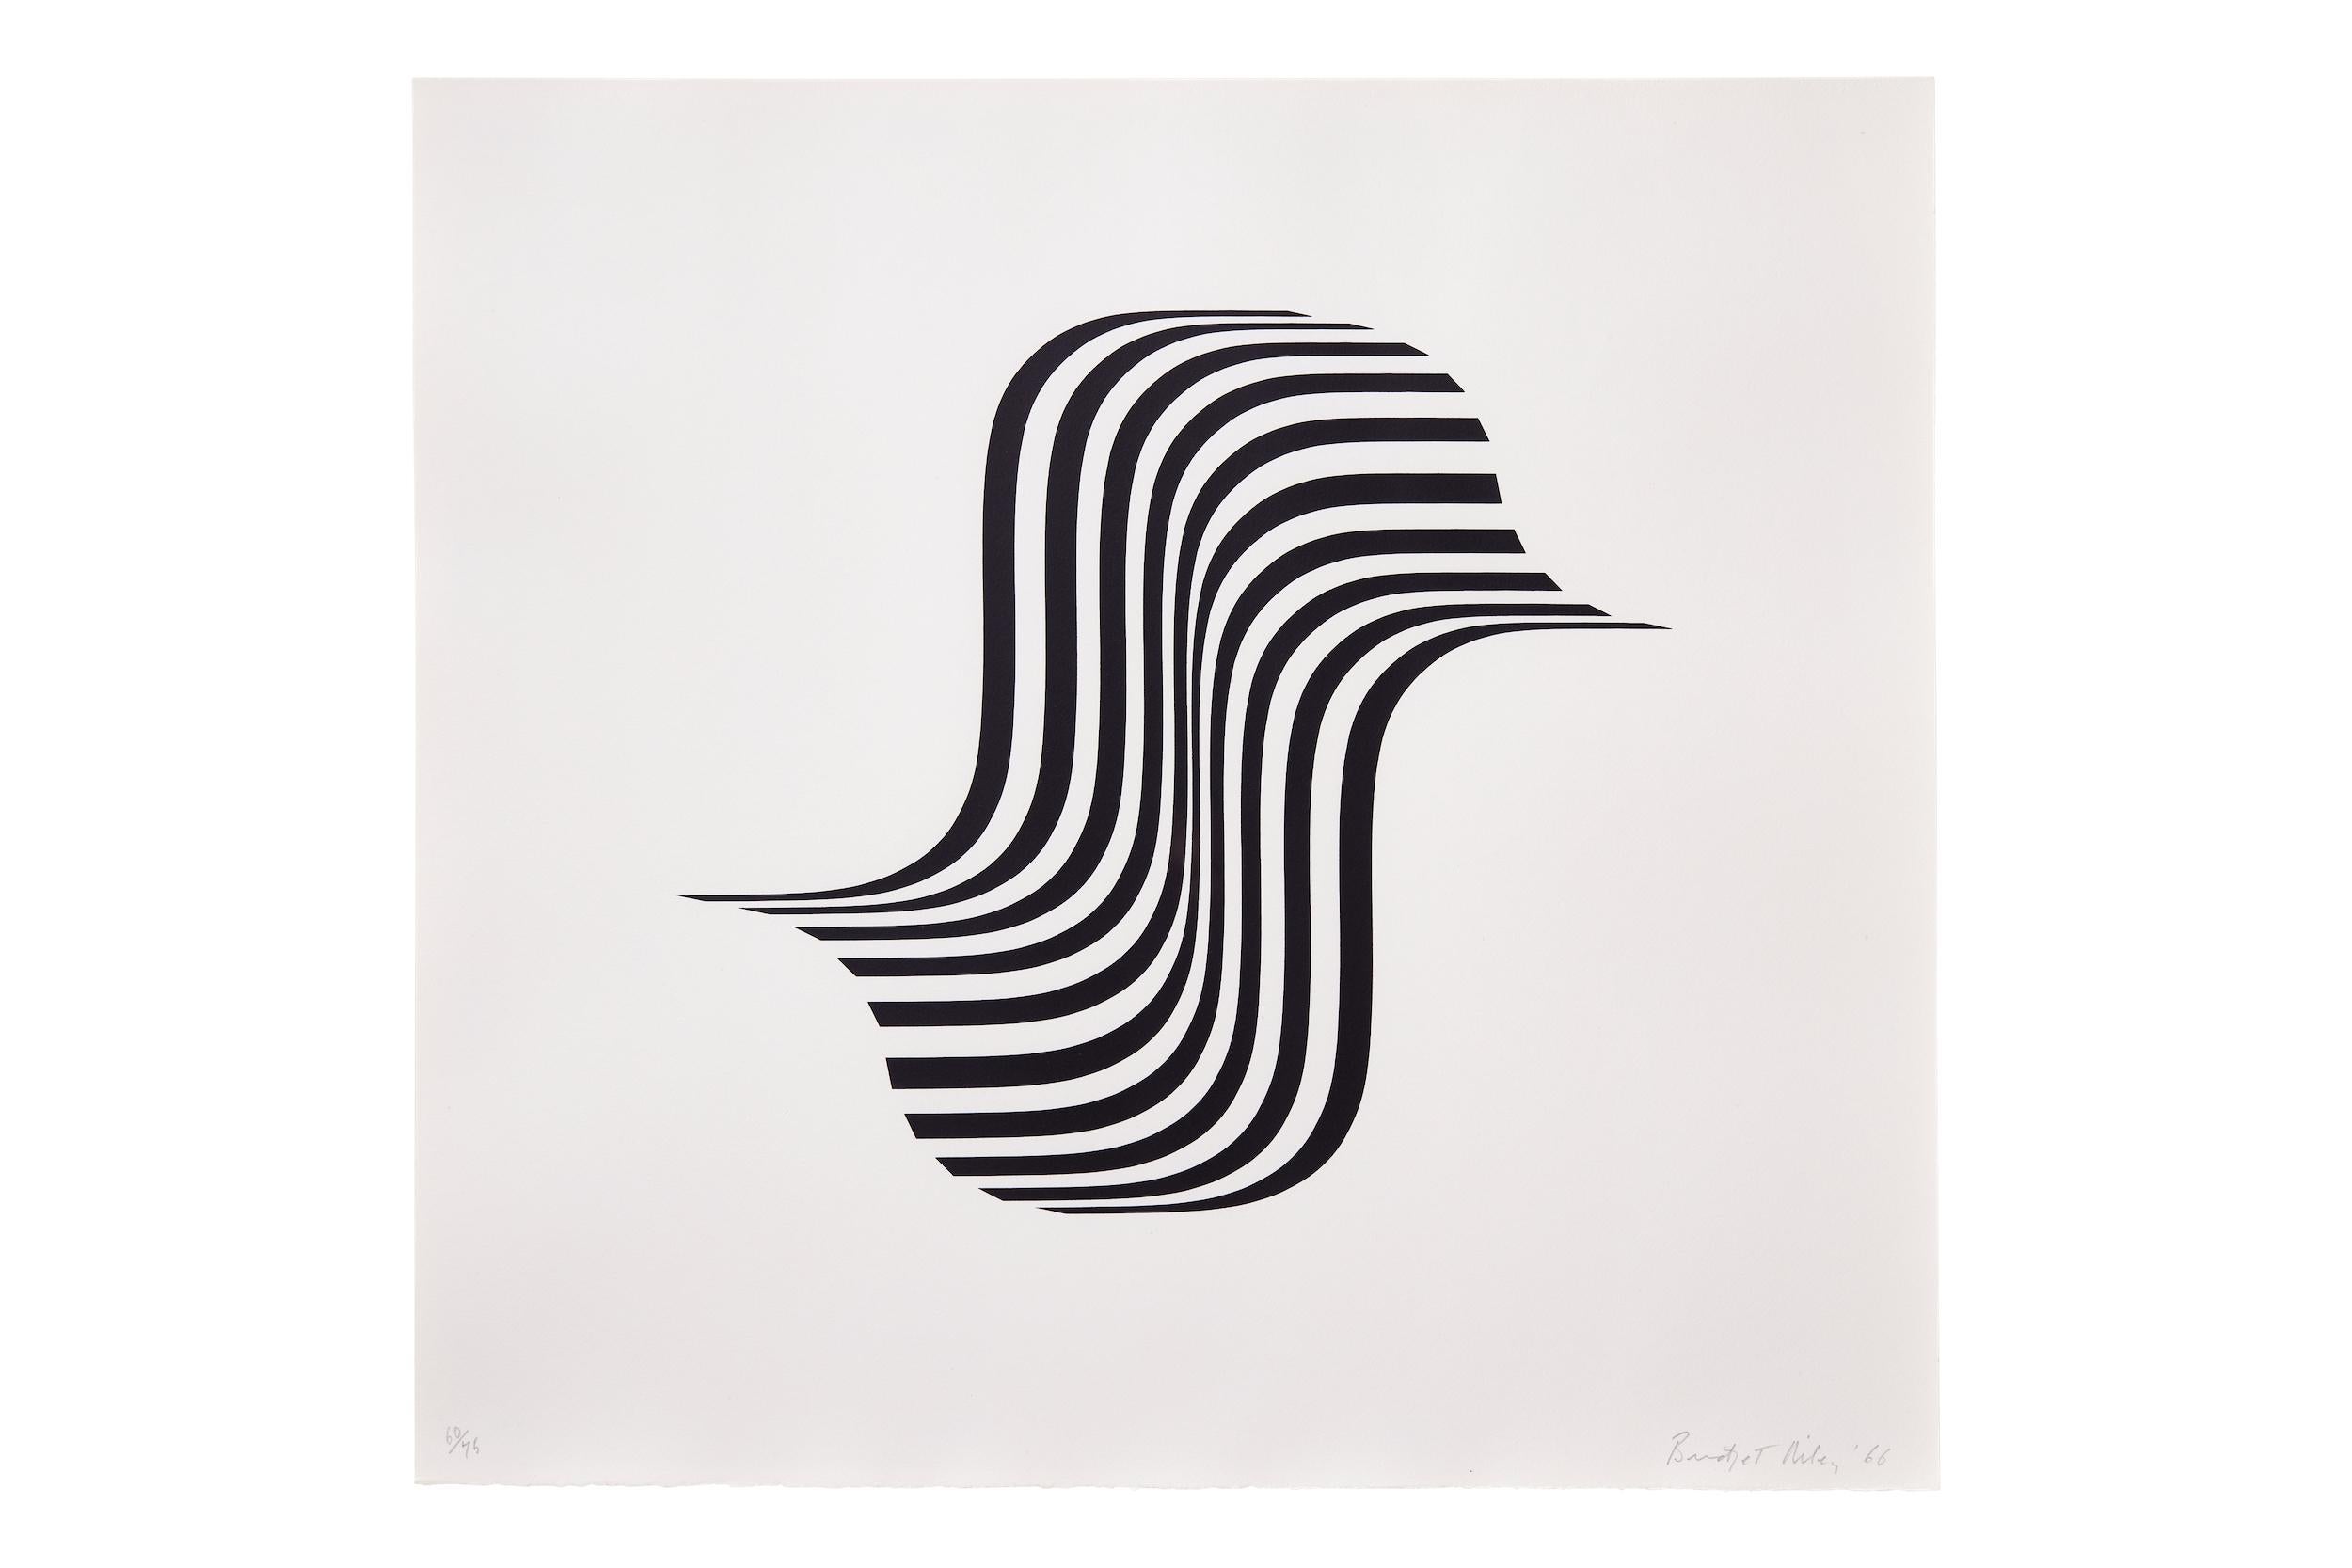 Untitled [Winged Curve] -- Print, Abstract, Op Art by Bridget RIley